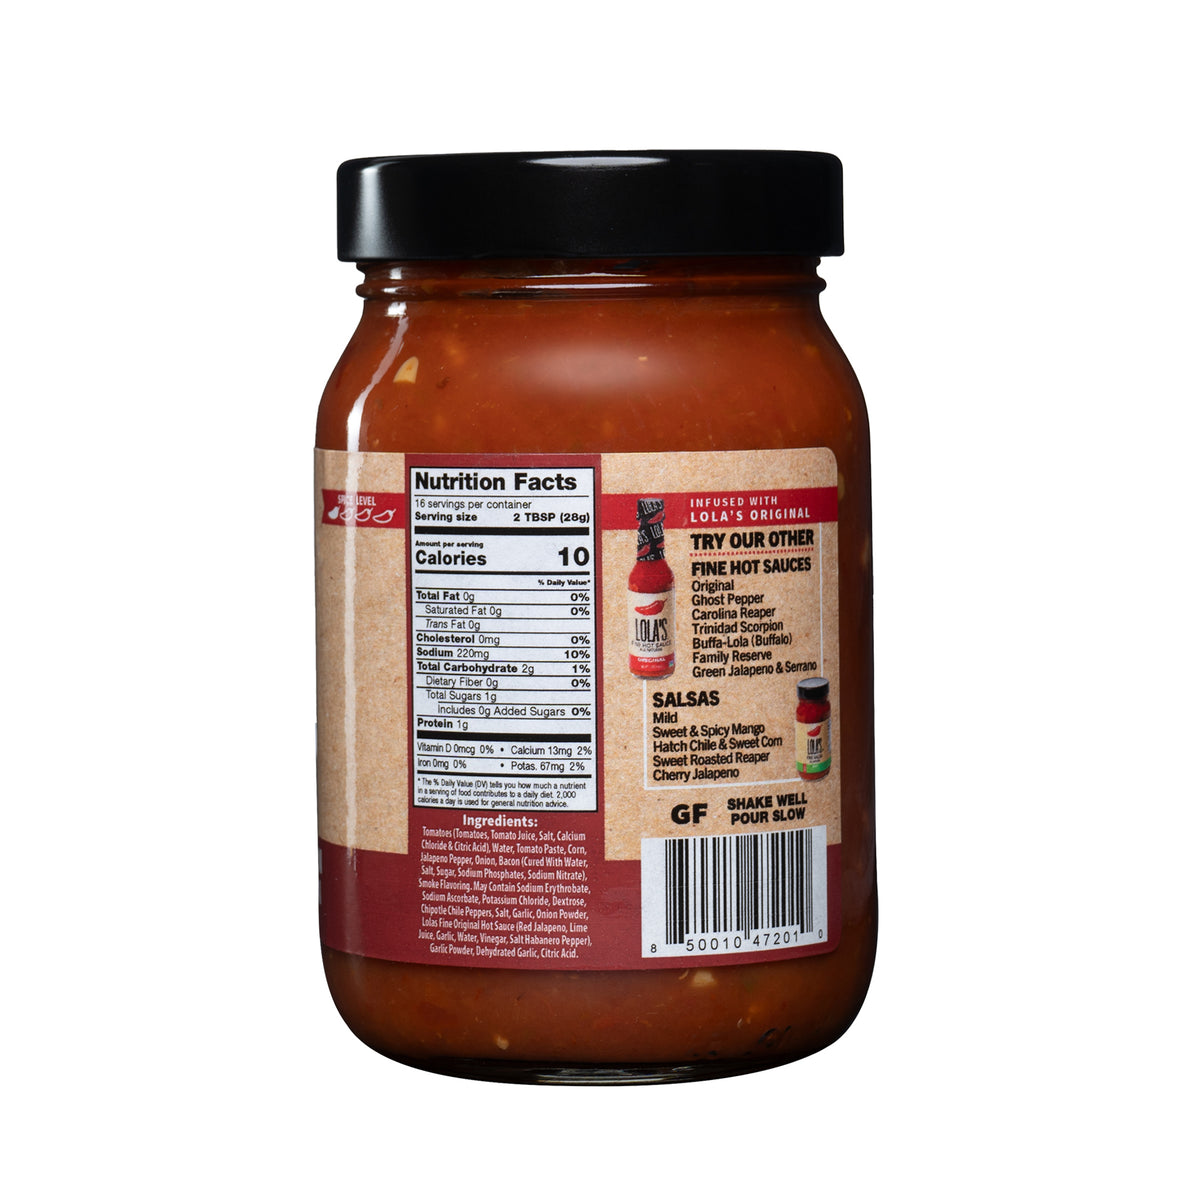 Lola's Smoked Bacon & Sweet Corn Salsa in a 16 oz glass jar, featuring a label with a list of salsas, a bar code, and a nutrition label.